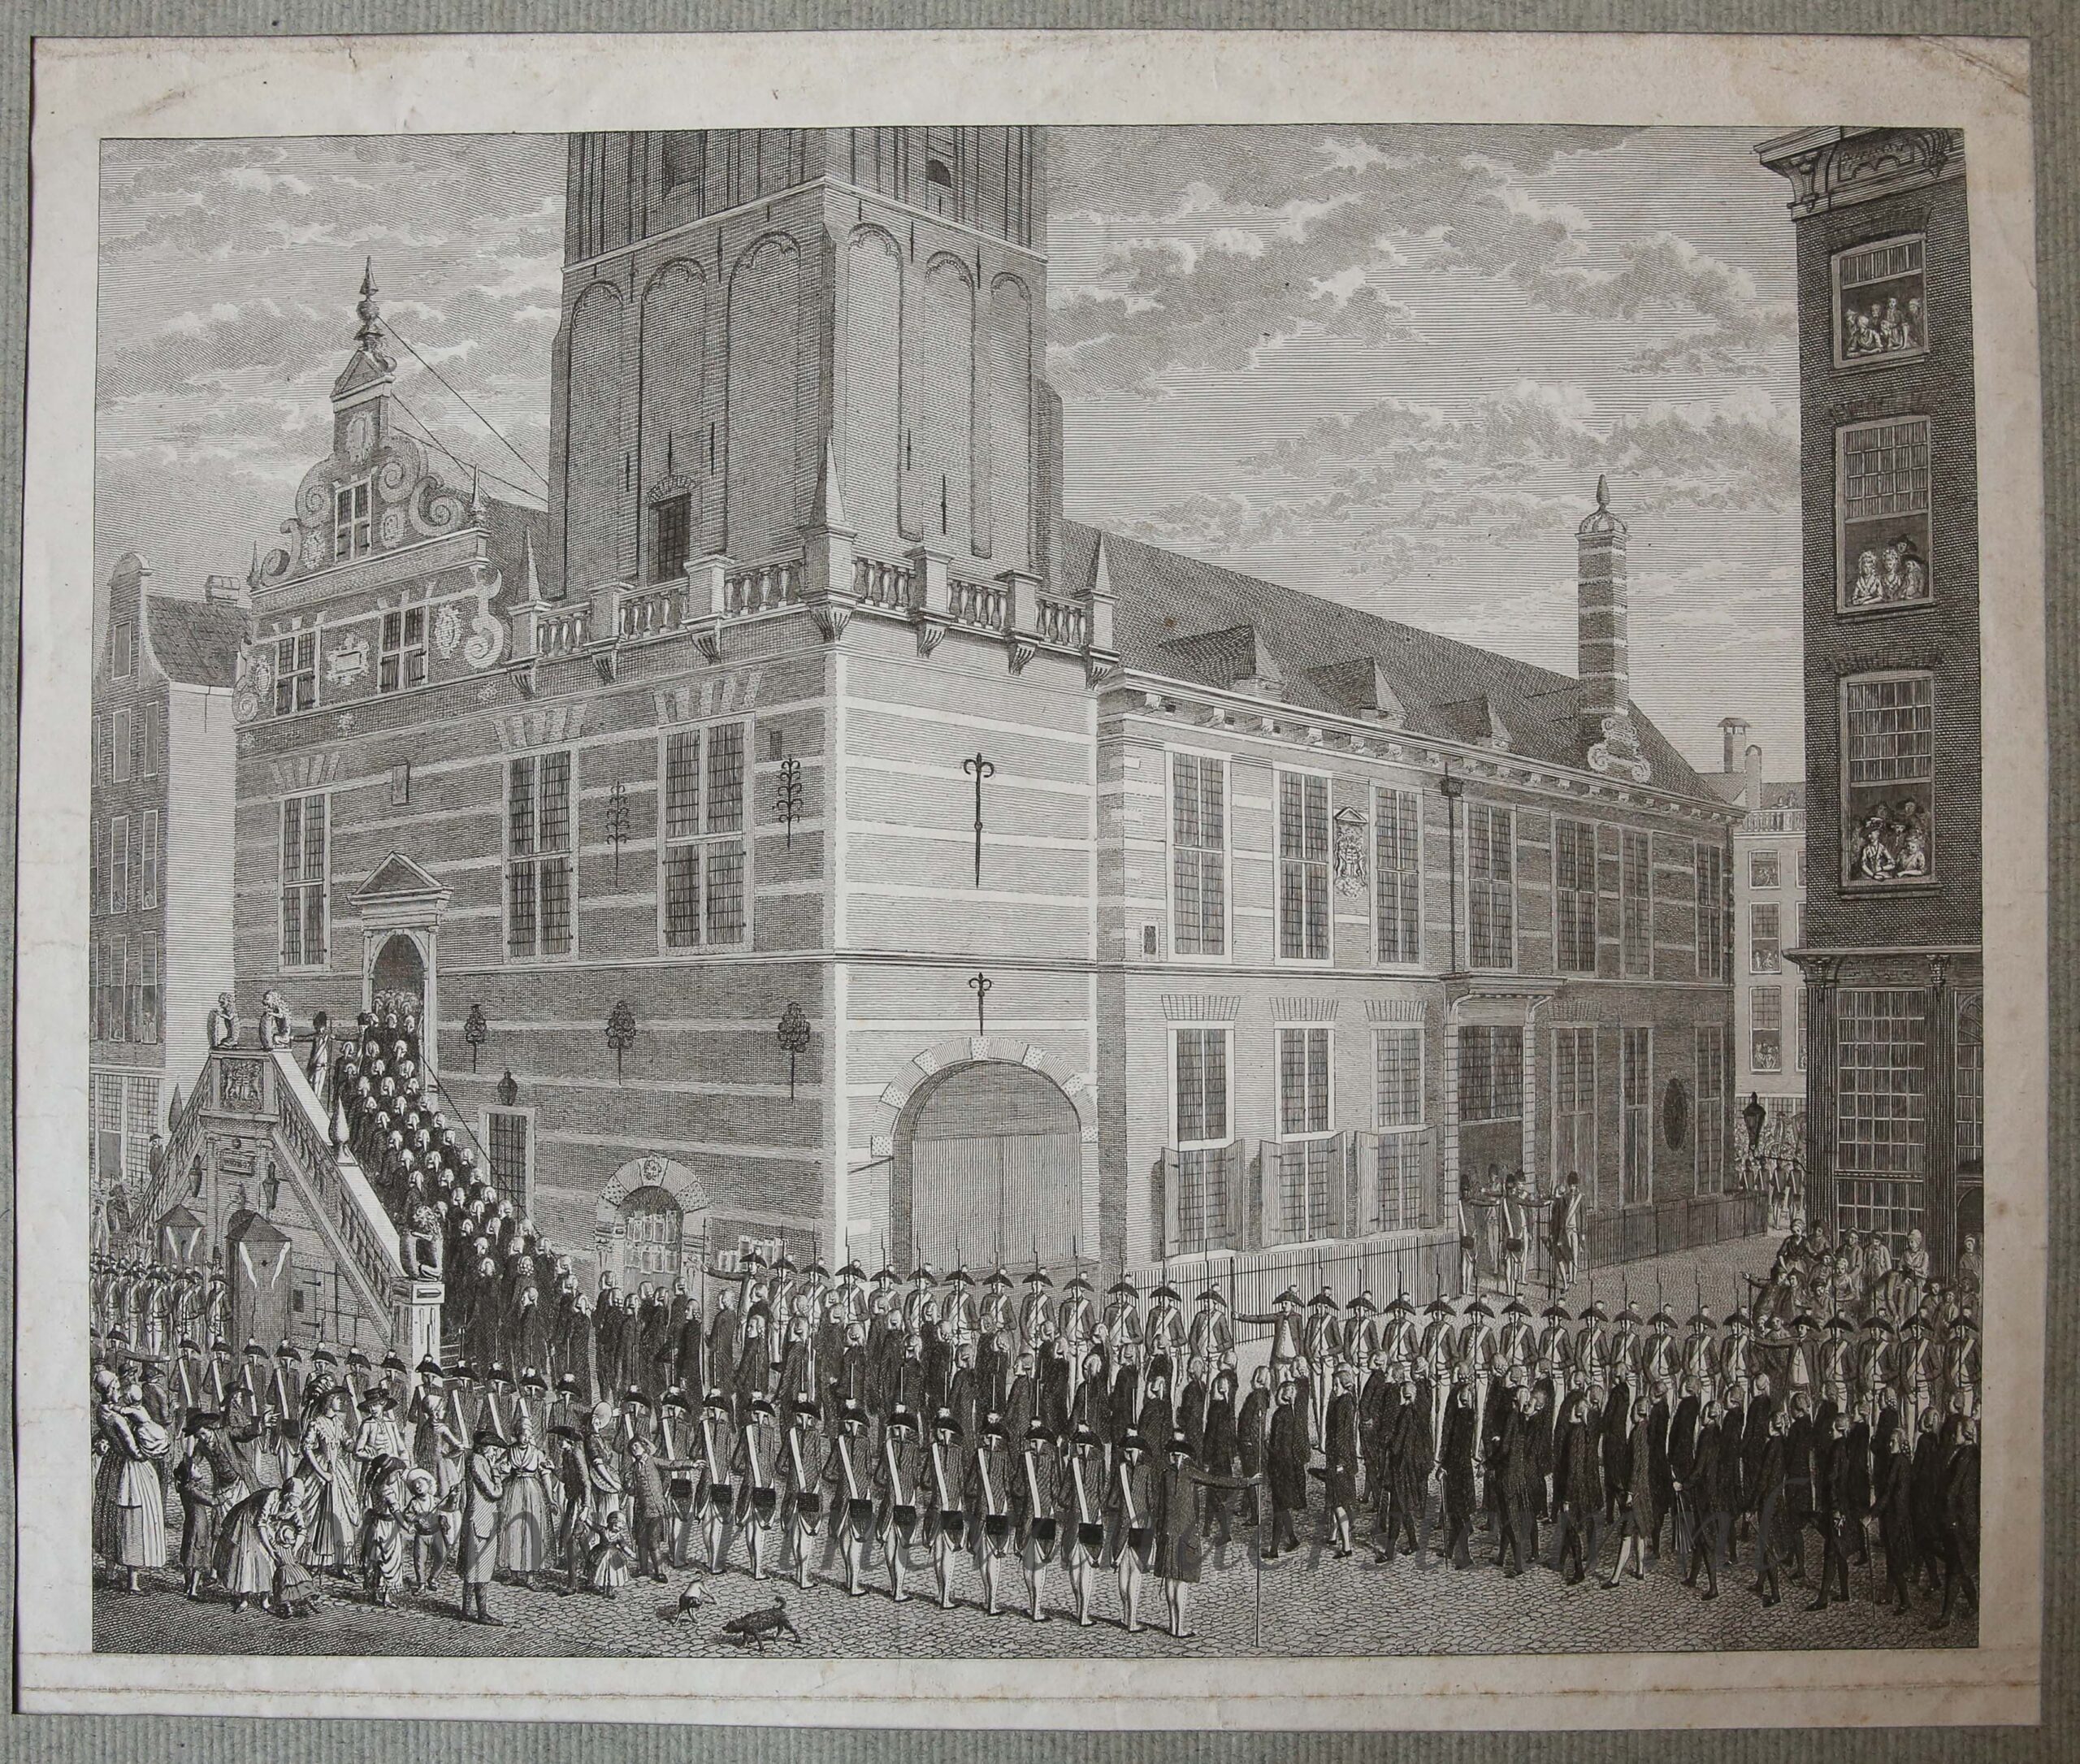 [Antique print, etching] View on the old town hall (stadhuis) of Rotterdam, published in 1787.